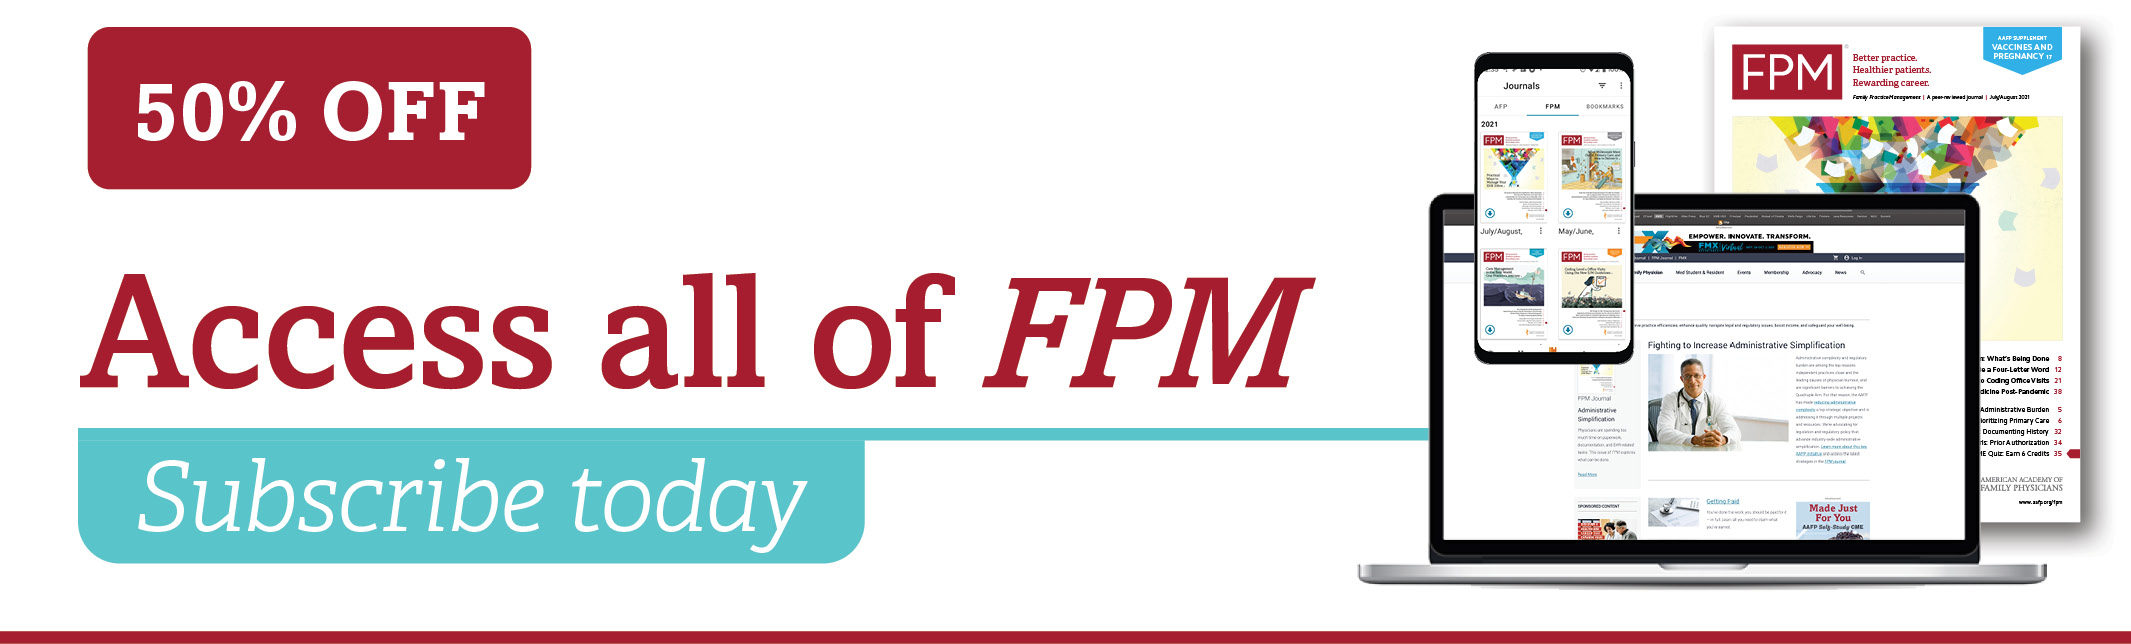 Access all of FPM